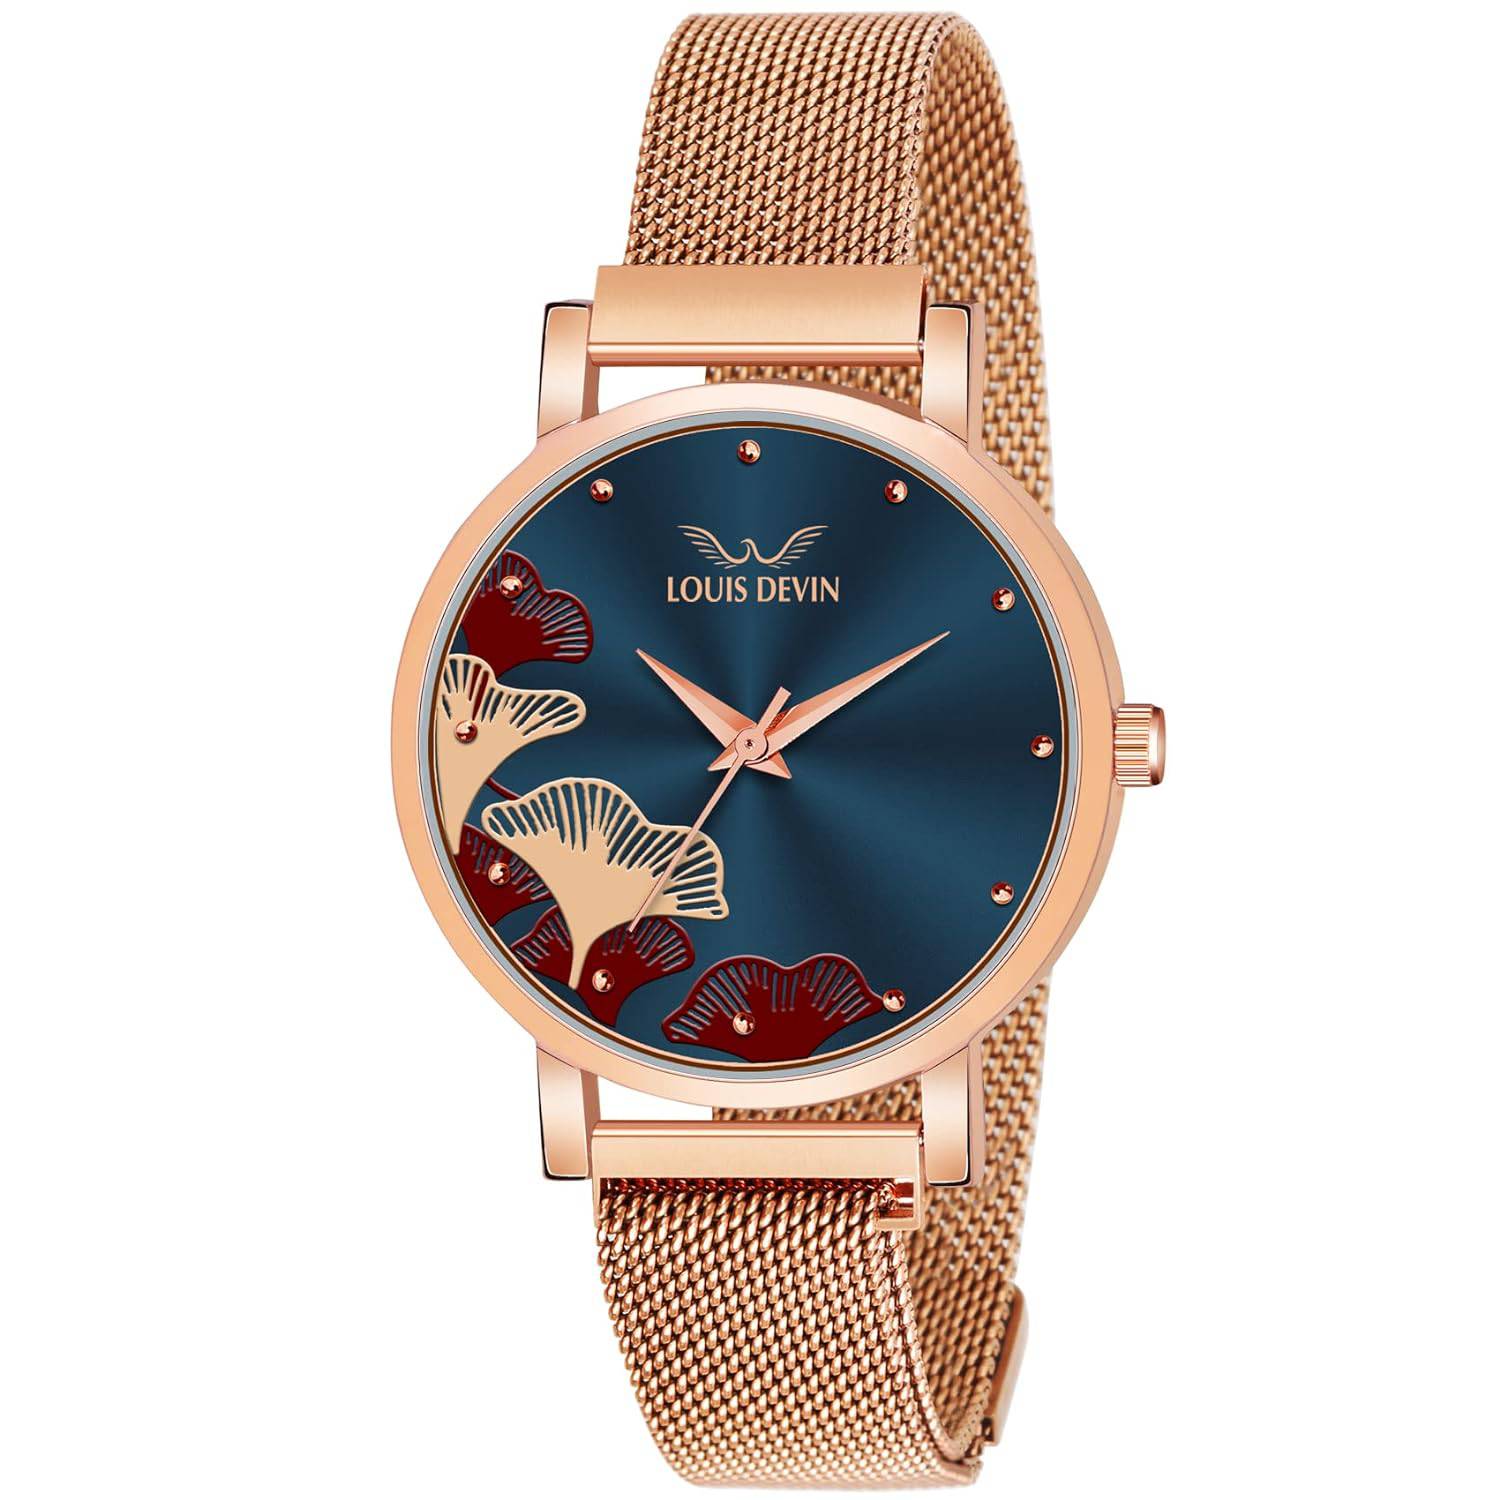 LOUIS DEVIN Rose Gold Plated Mesh Chain Analog Wrist Watch for Women (Black/Blue/Rose Gold Dial) | RG162 - YuvaFlowers